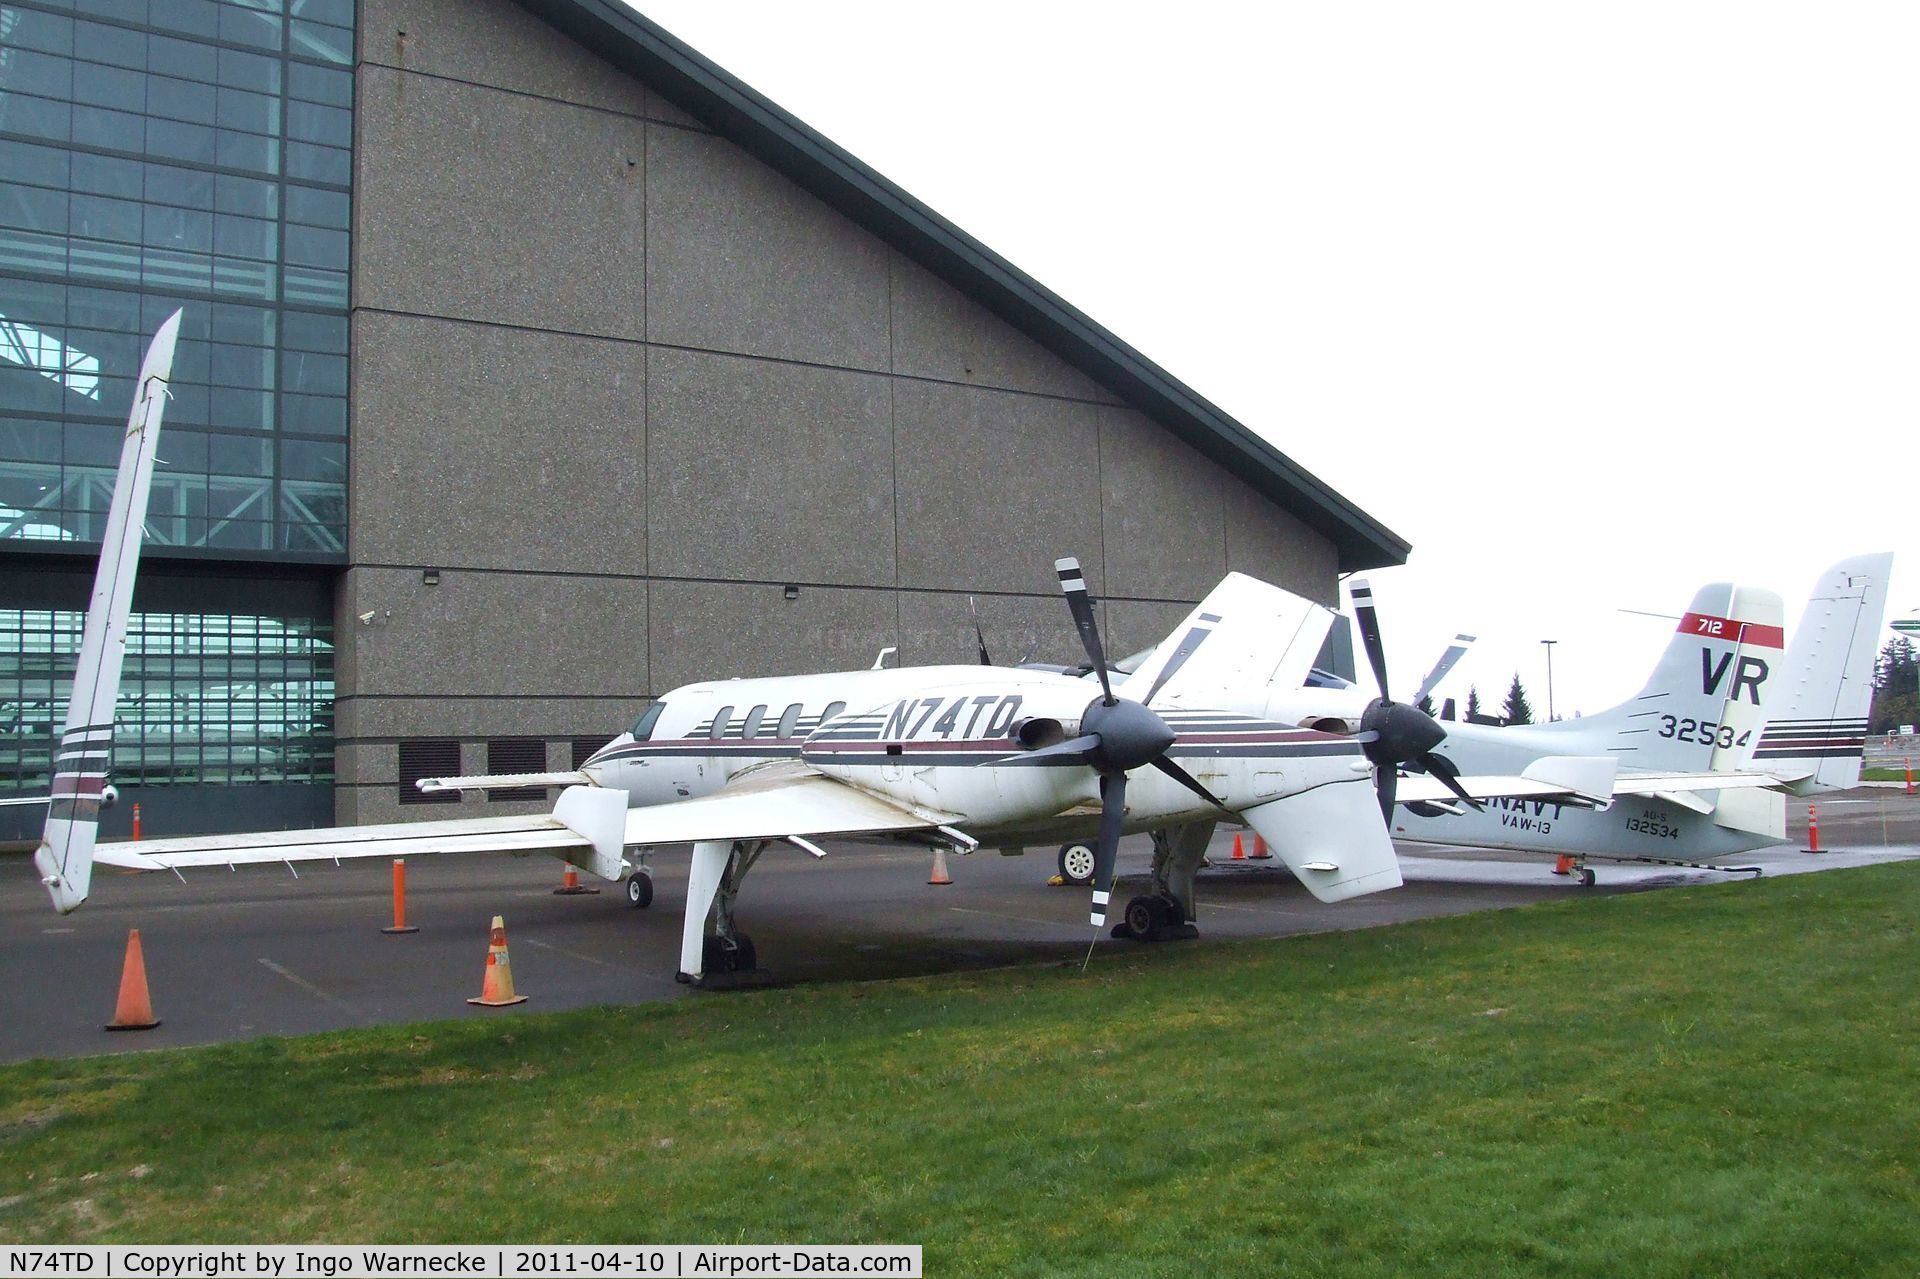 N74TD, 1992 Beech 2000A Starship 1 Starship 1 C/N NC-27, Beechcraft 2000A Starship at the Evergreen Aviation & Space Museum, McMinnville OR